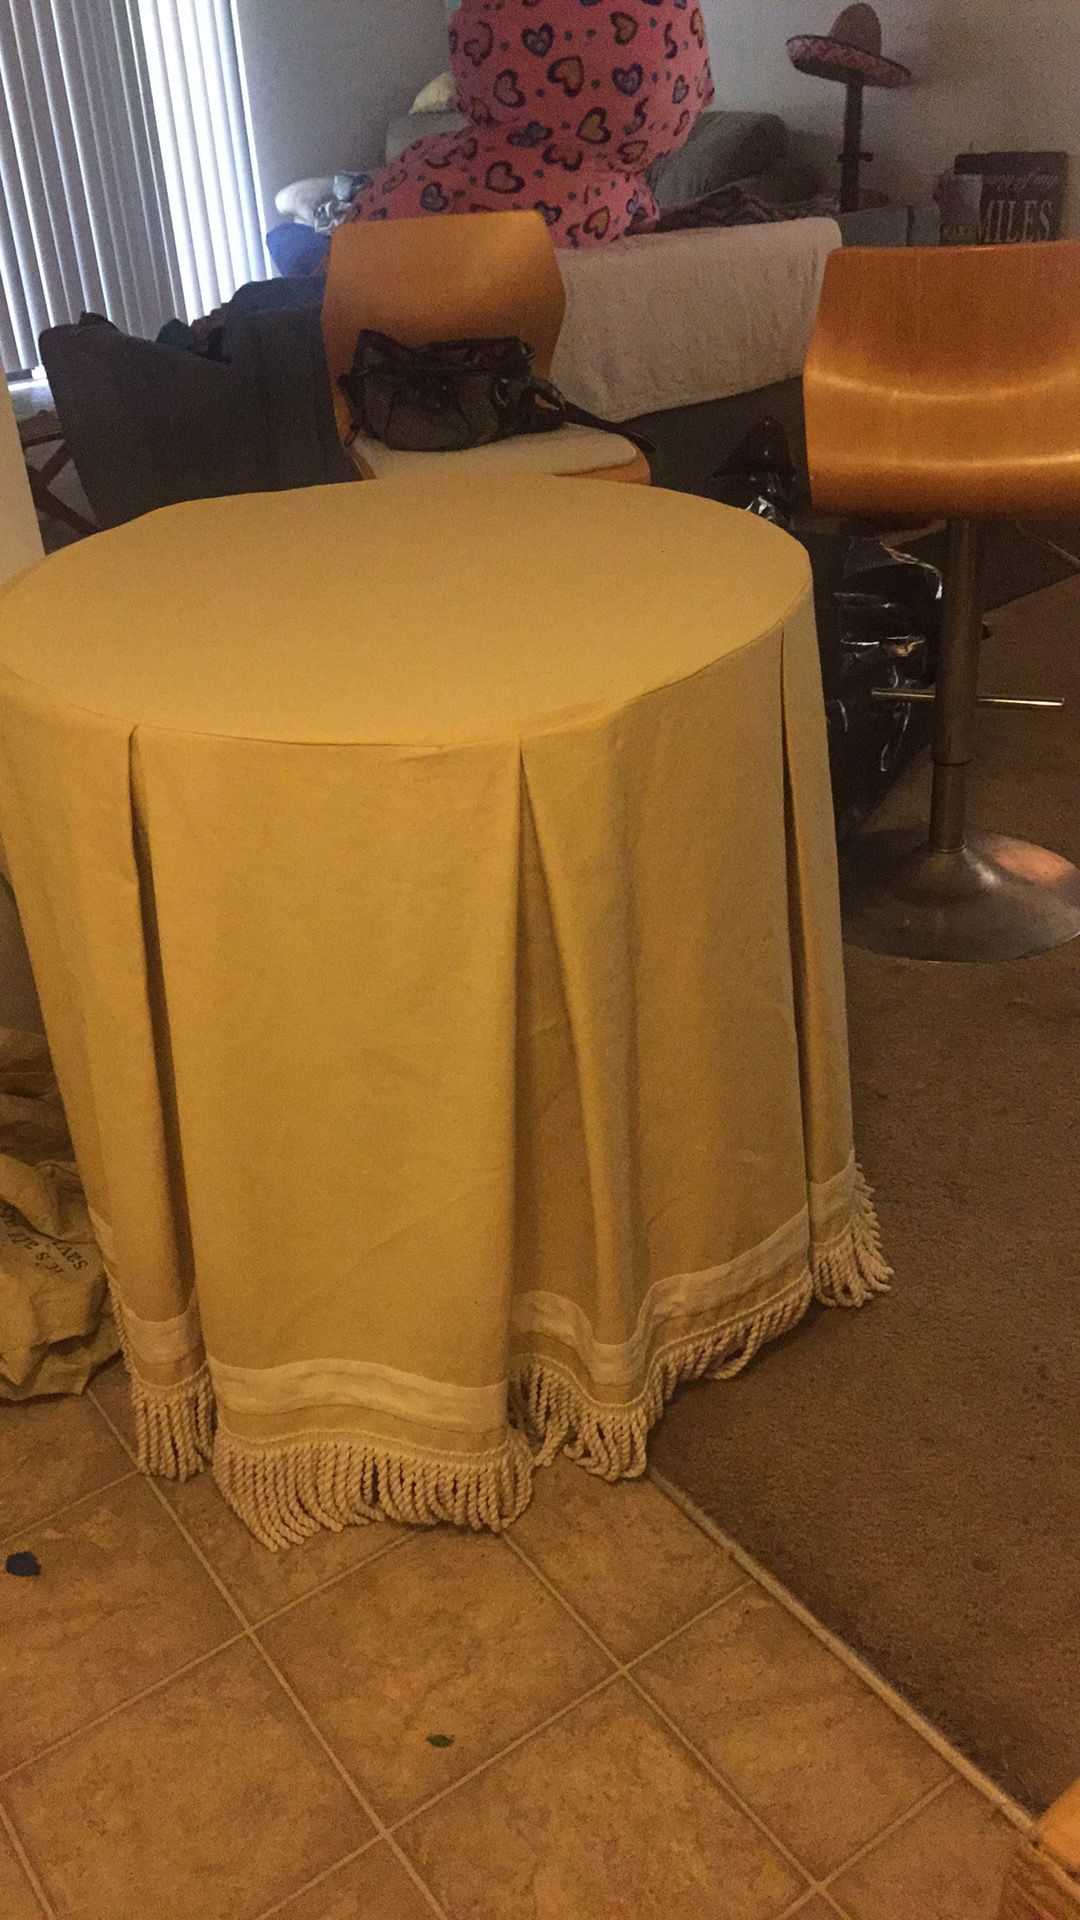 Ballard tablecloth for round table